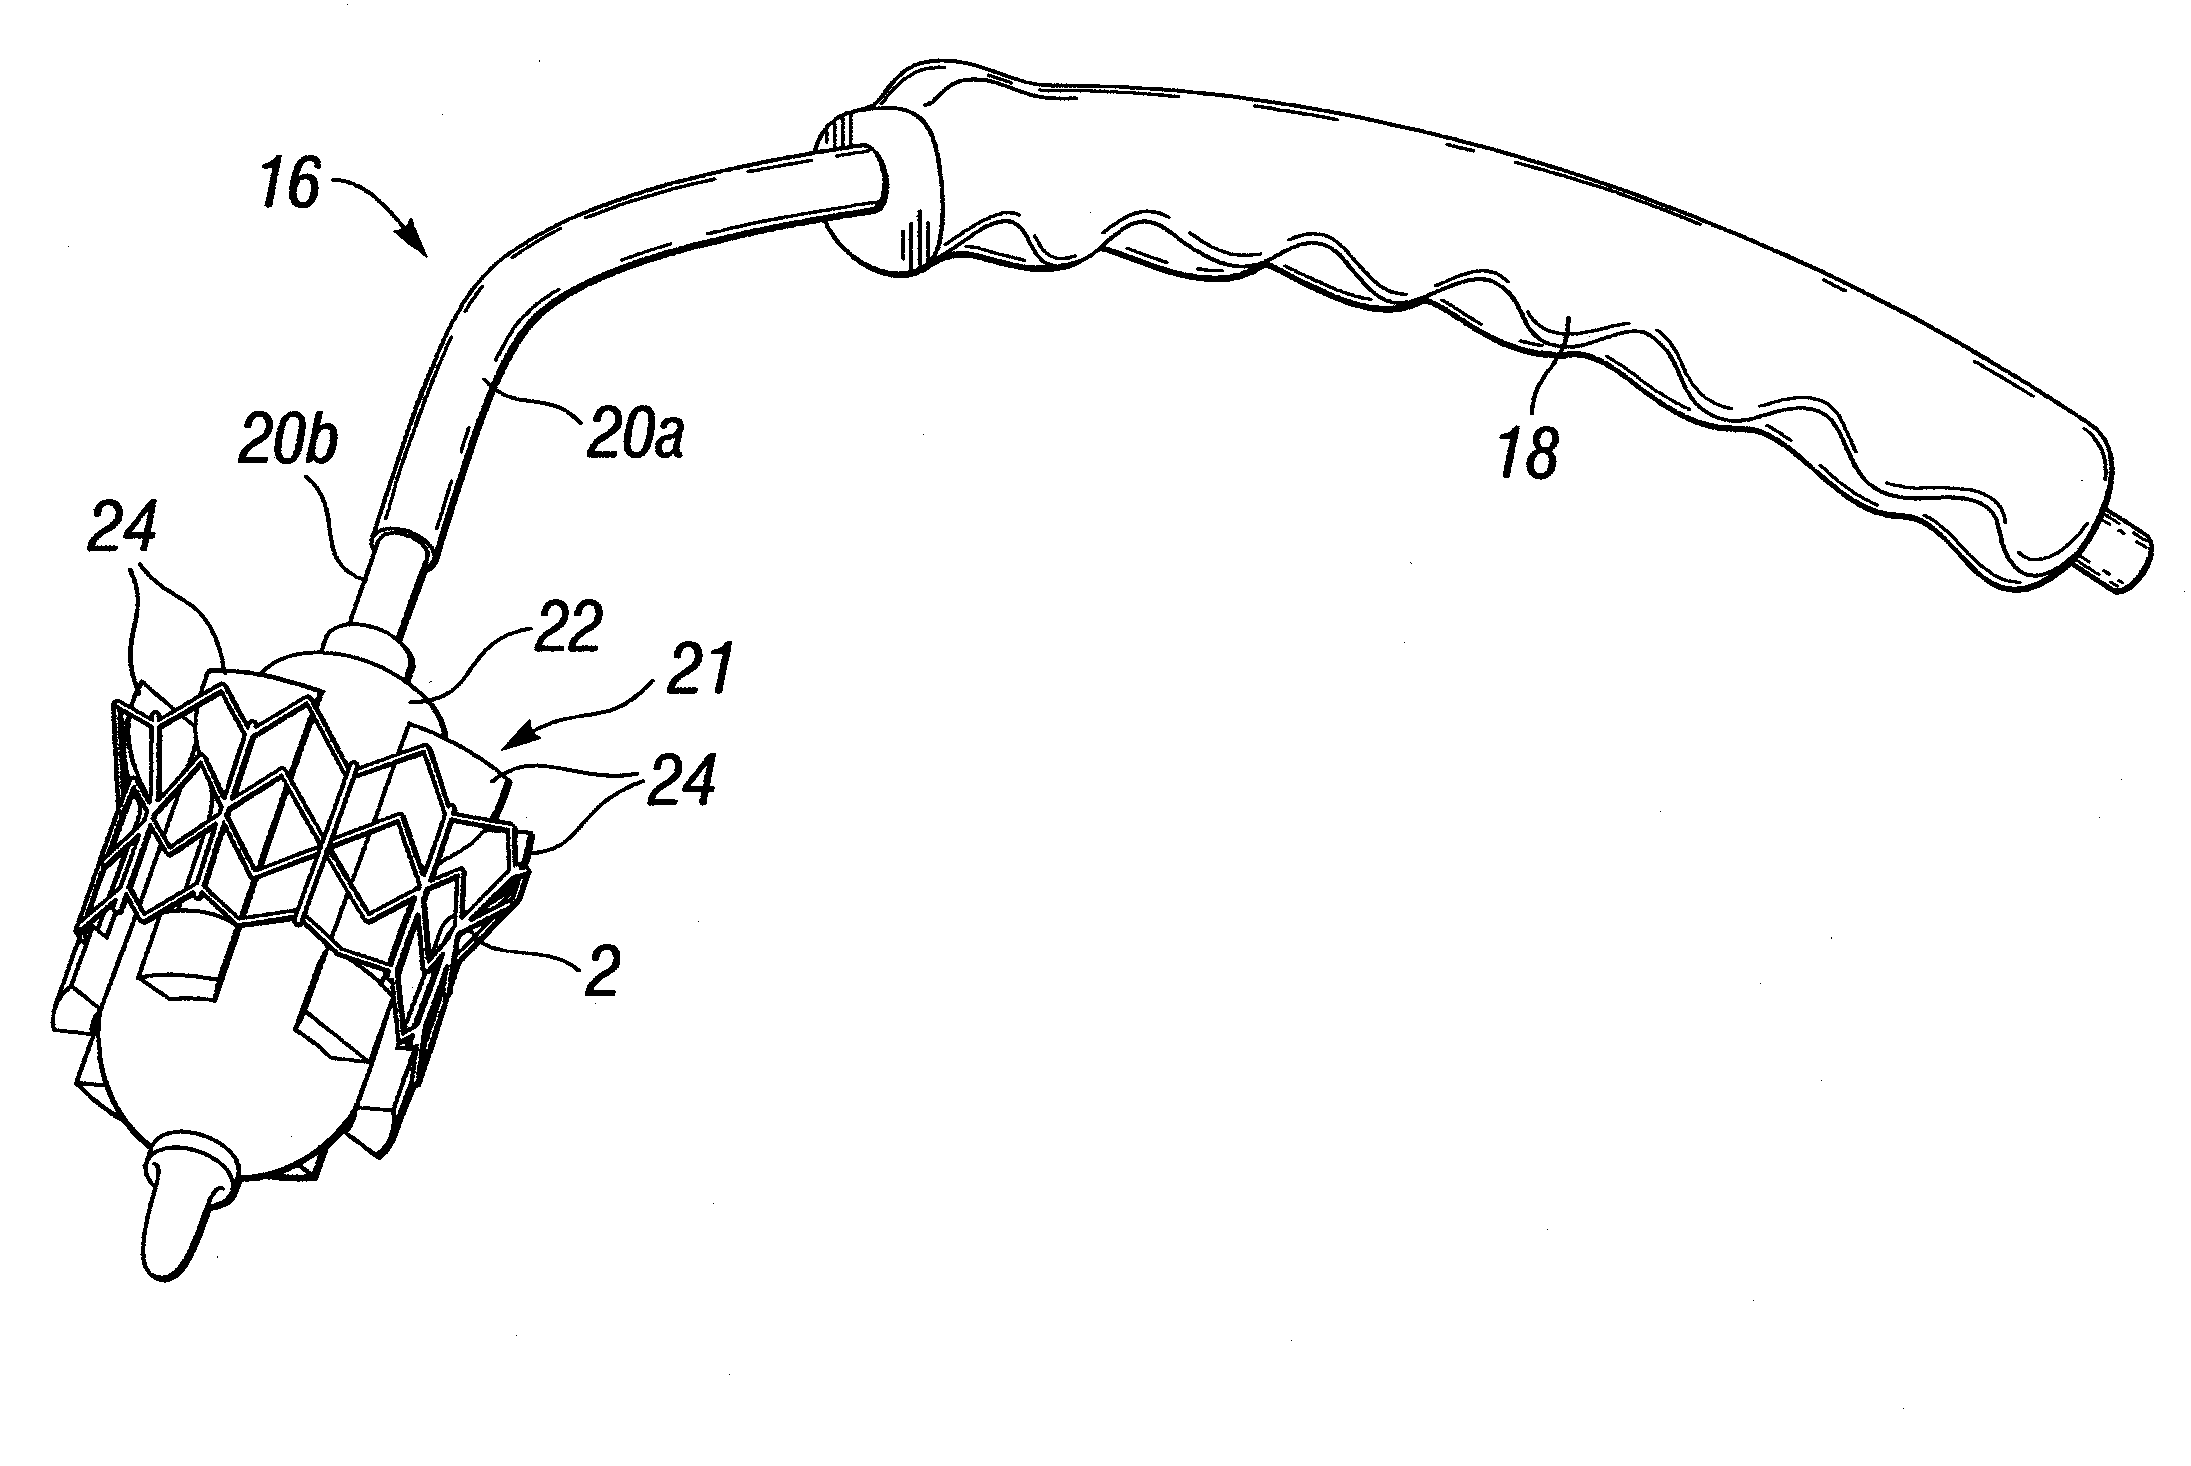 Methods of implanting a heart valve at an aortic annulus